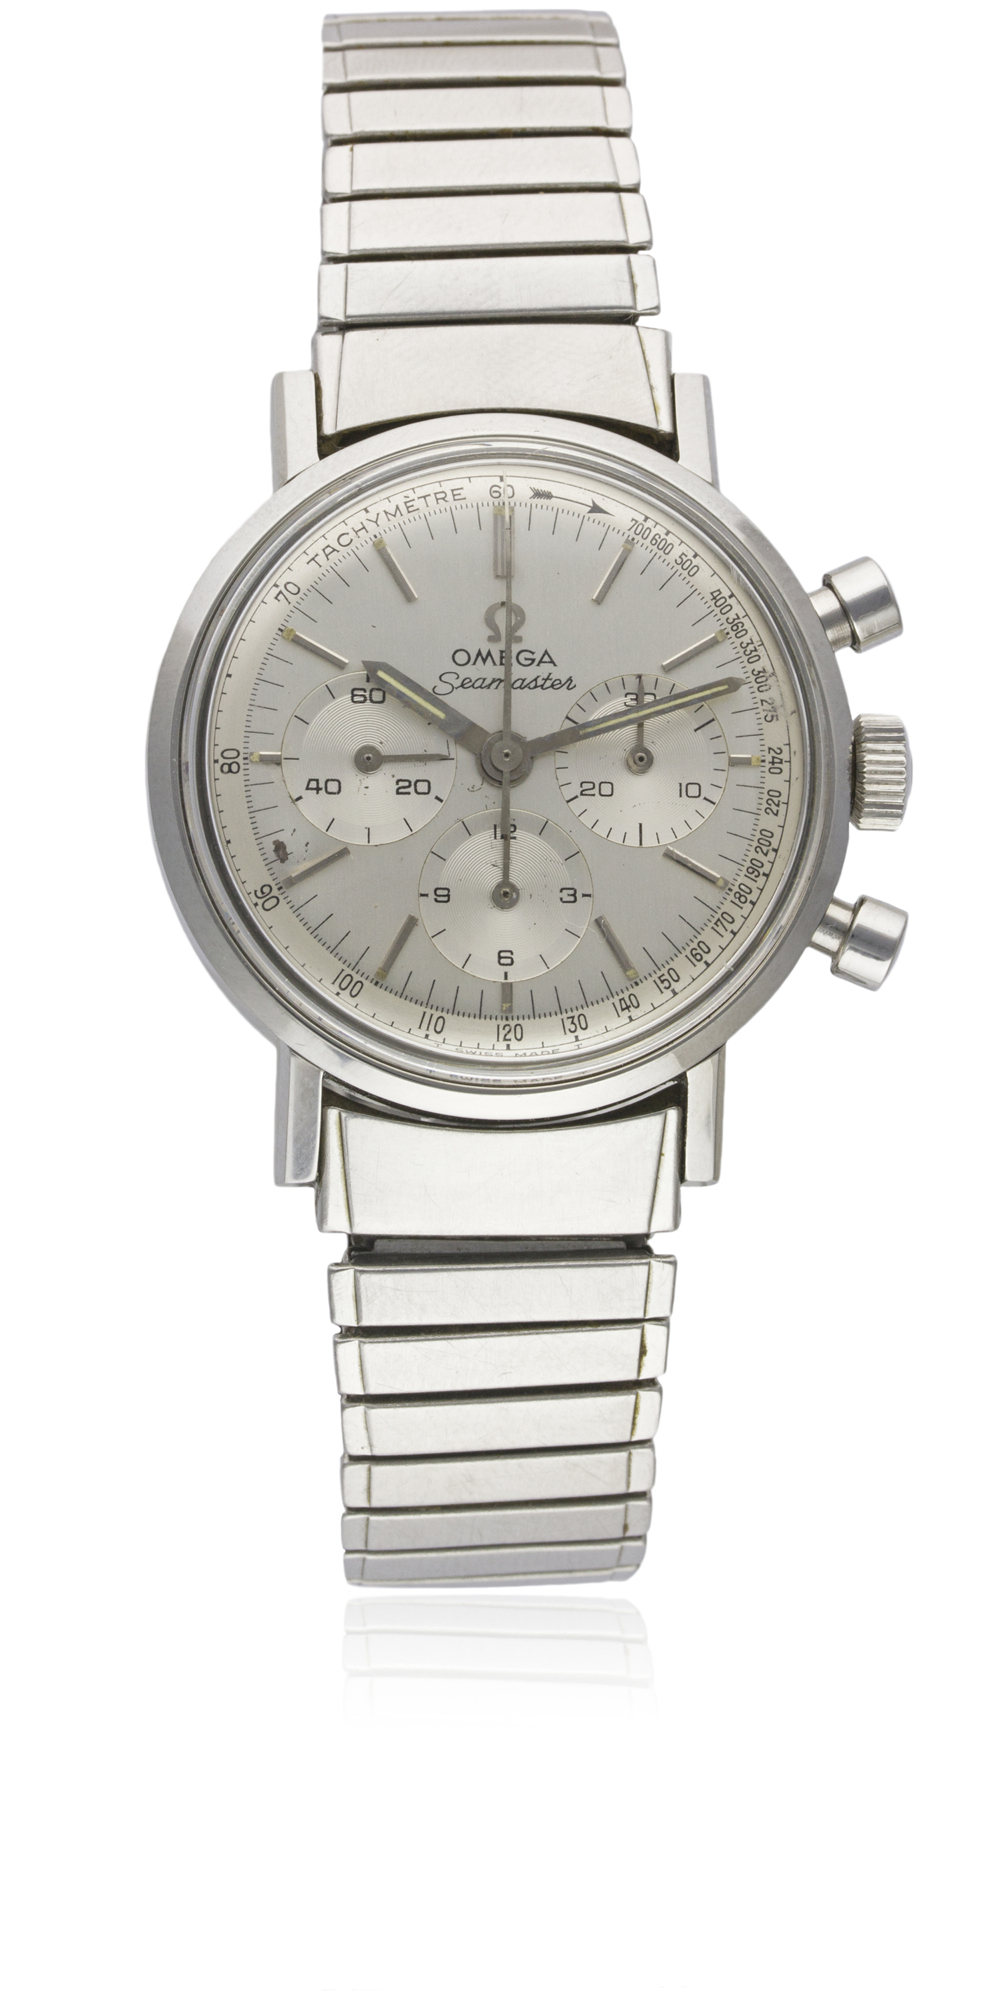 A GENTLEMAN'S STAINLESS STEEL OMEGA SEAMASTER CHRONOGRAPH BRACELET WATCH CIRCA 1965, REF. 105.005-65 - Image 2 of 2